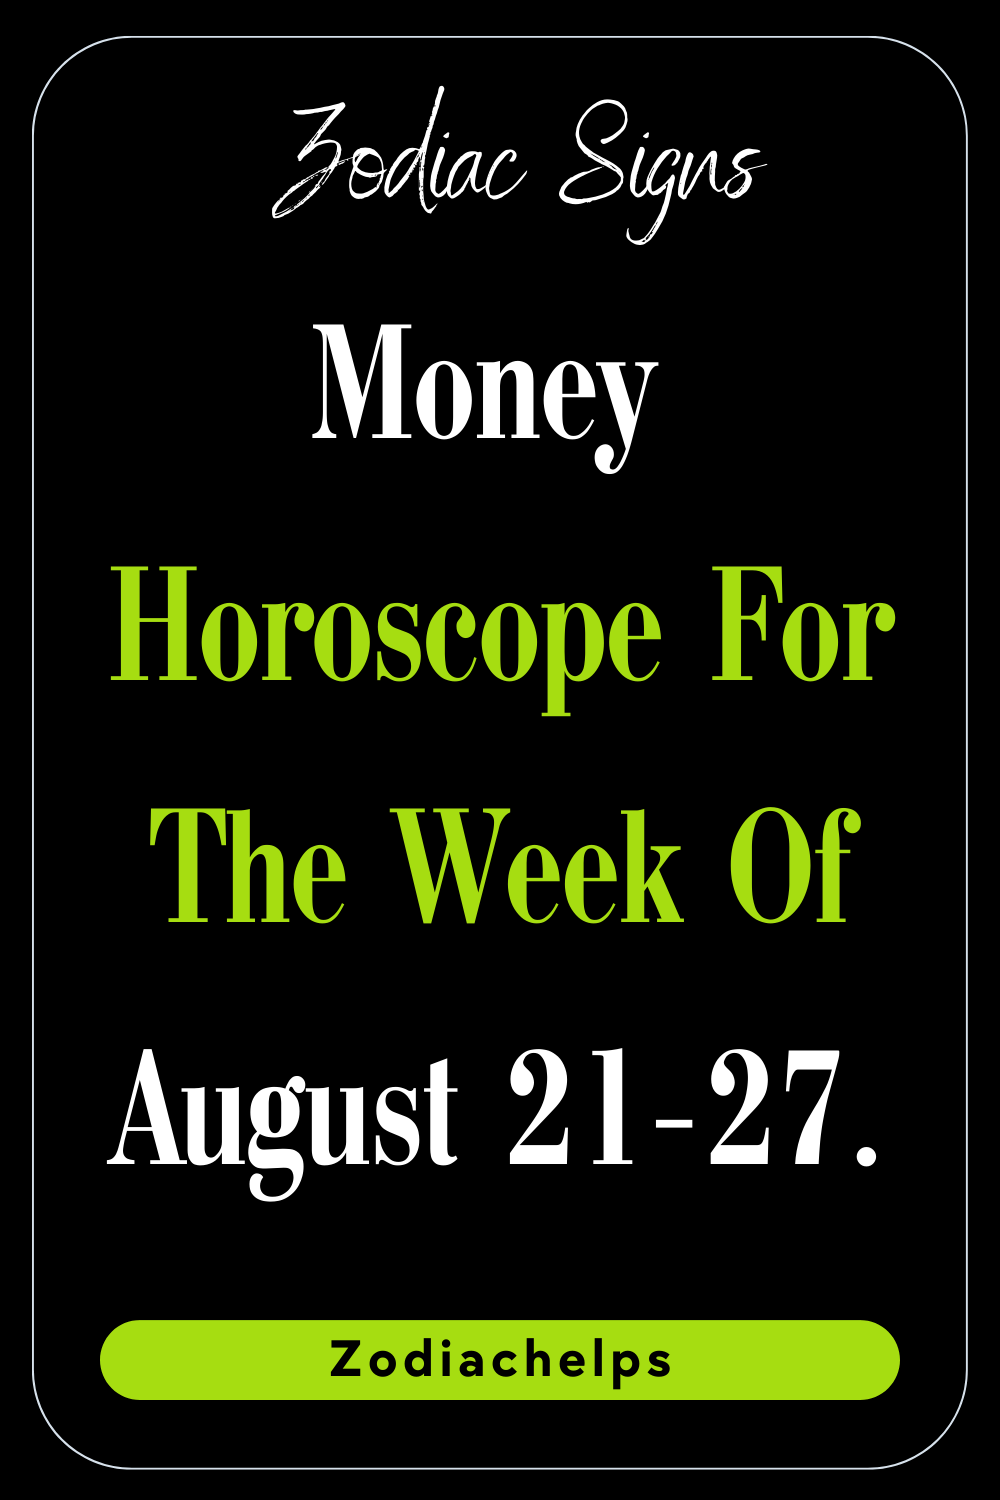 Money Horoscope For The Week Of August 21-27.